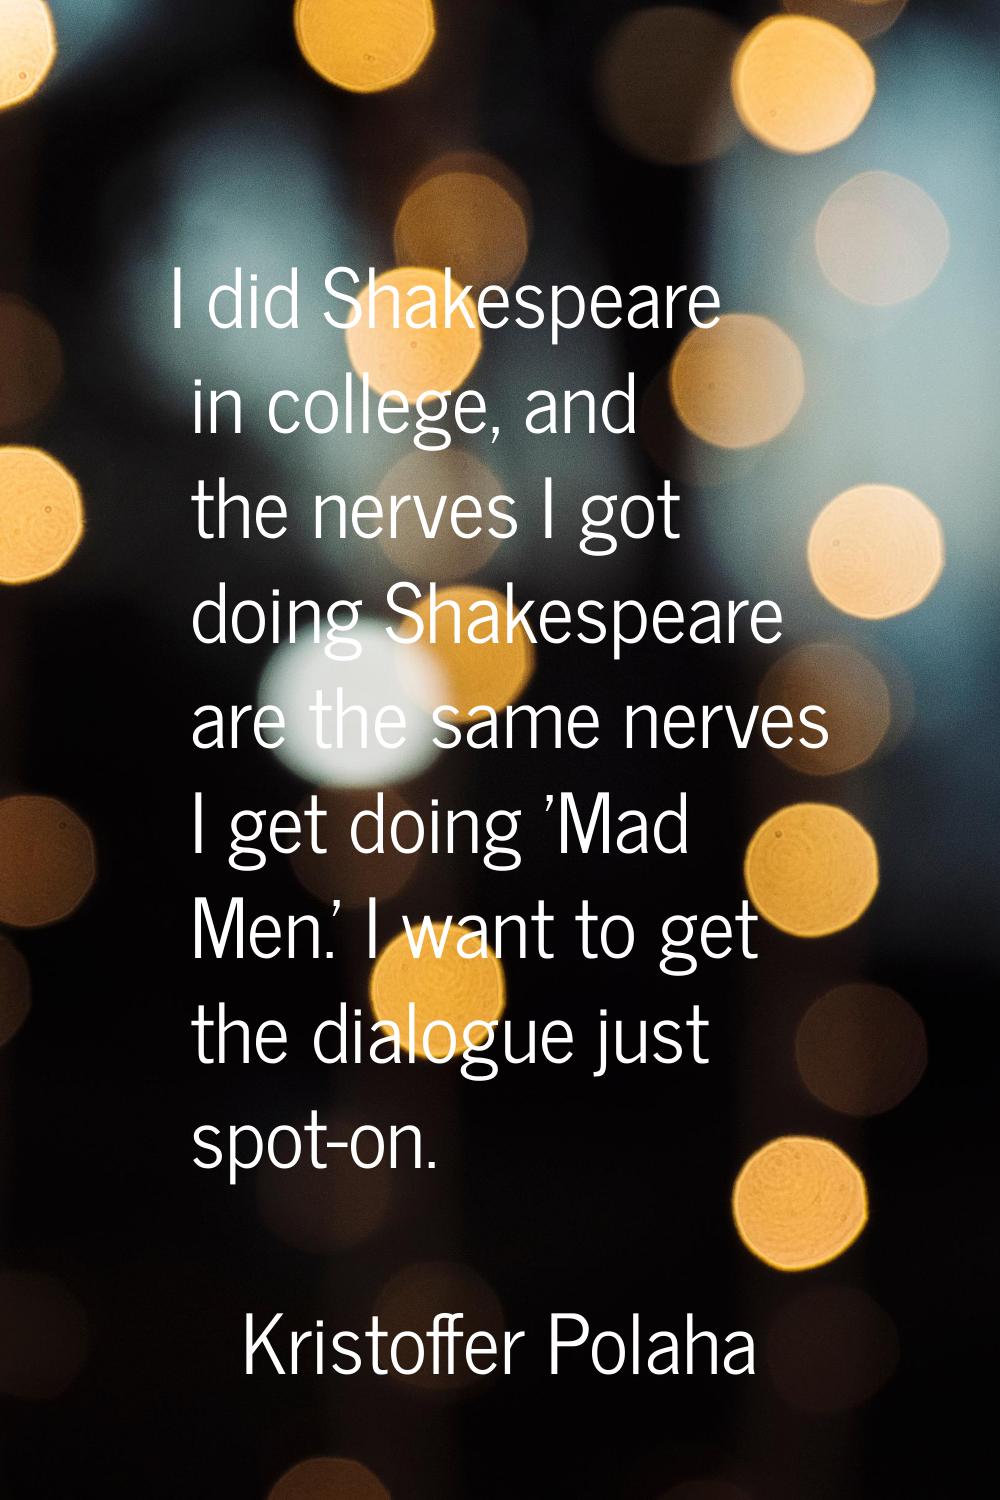 I did Shakespeare in college, and the nerves I got doing Shakespeare are the same nerves I get doin